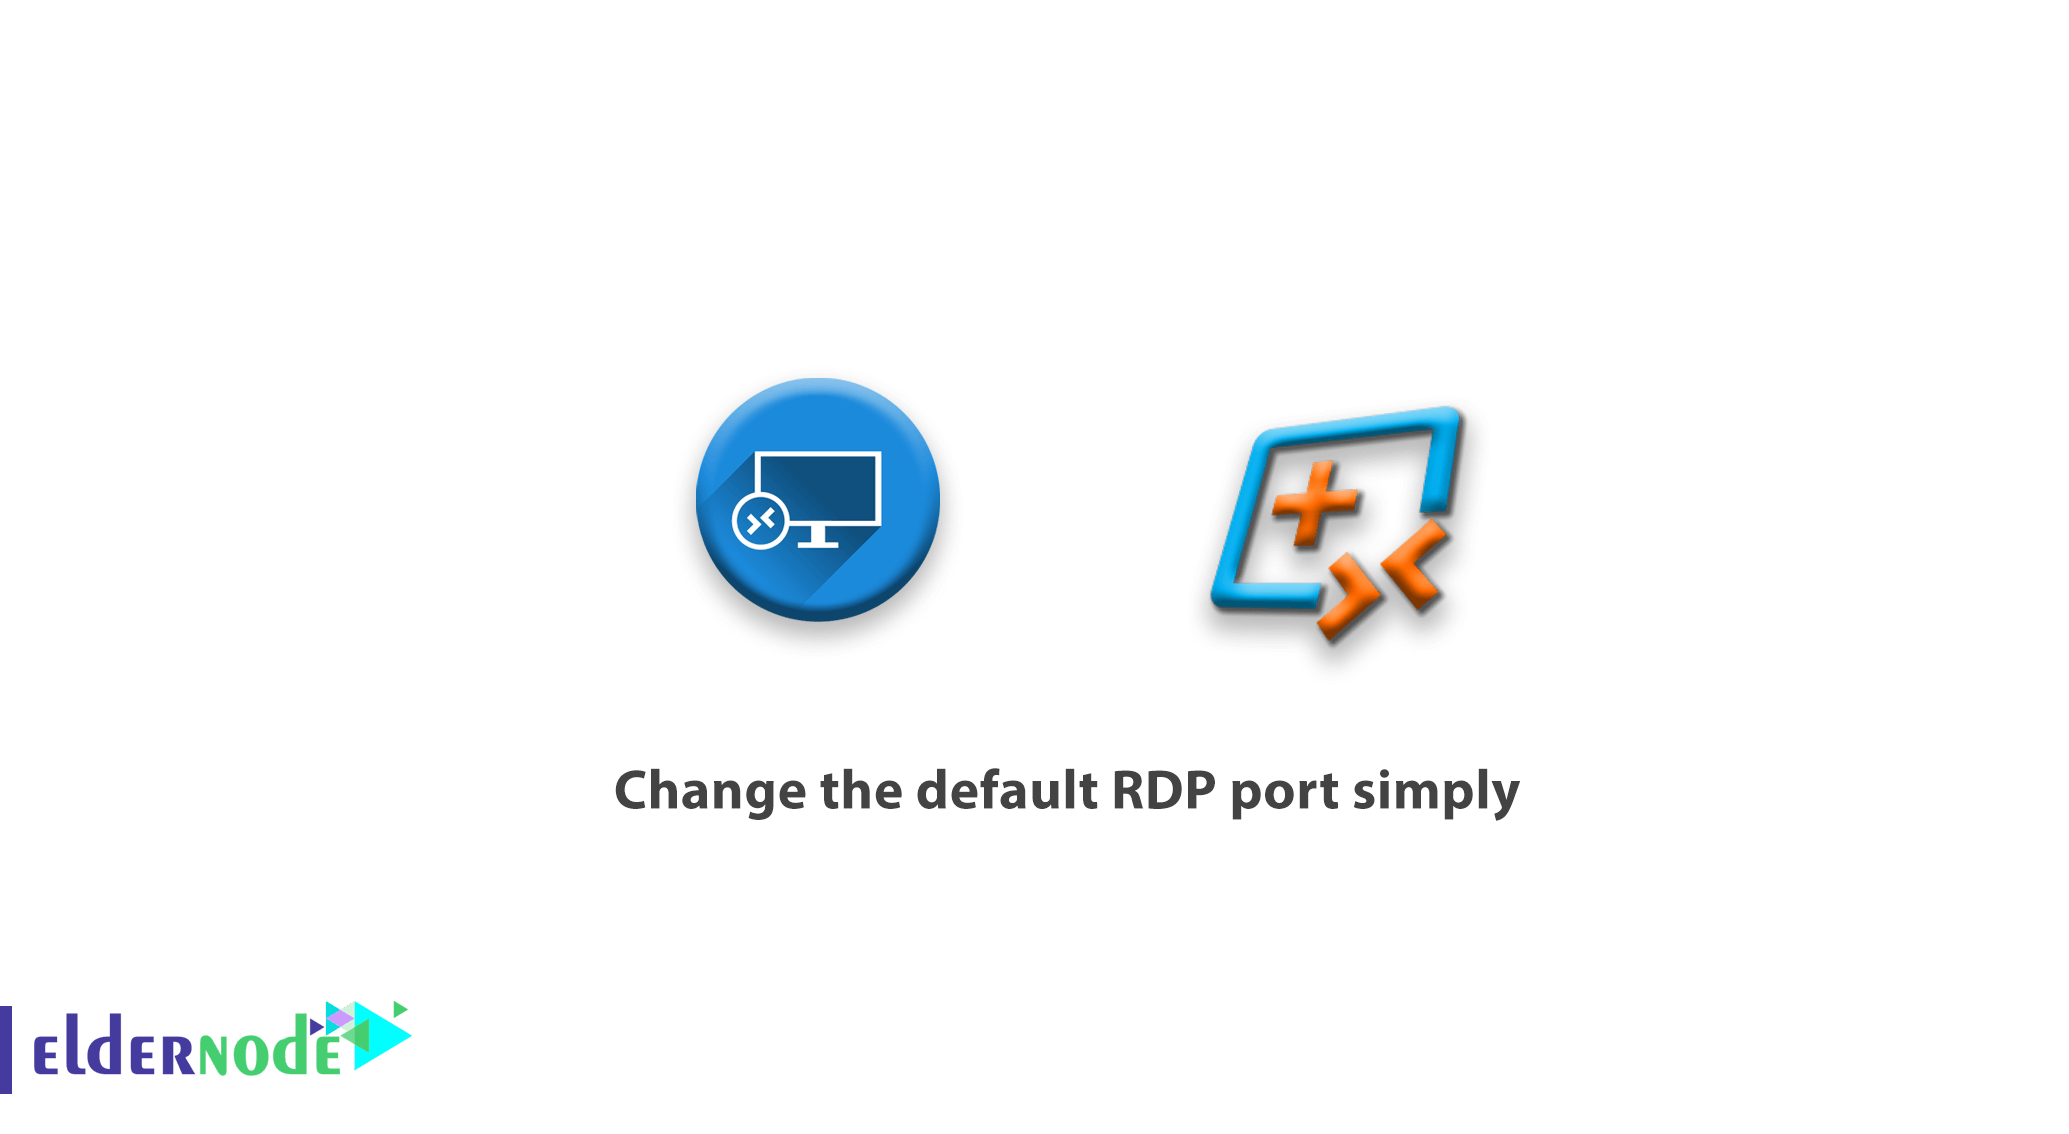 Learn how to change the default RDP port simply